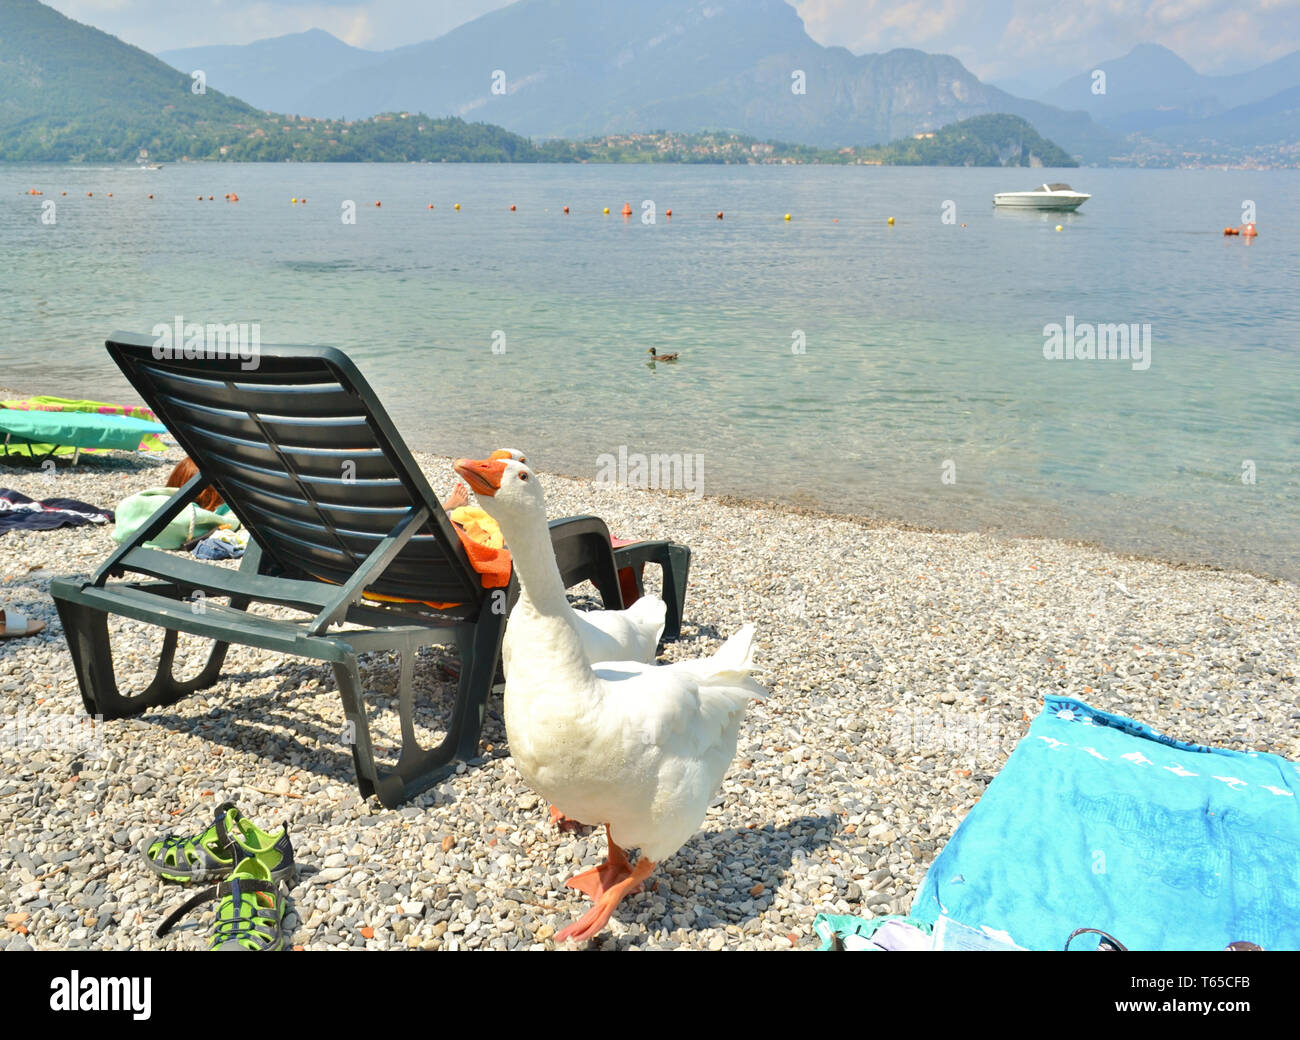 Two angry gooses are walking along Lierna beach with Bellagio peninsula and lake Como with motorboat anchored in background. Stock Photo